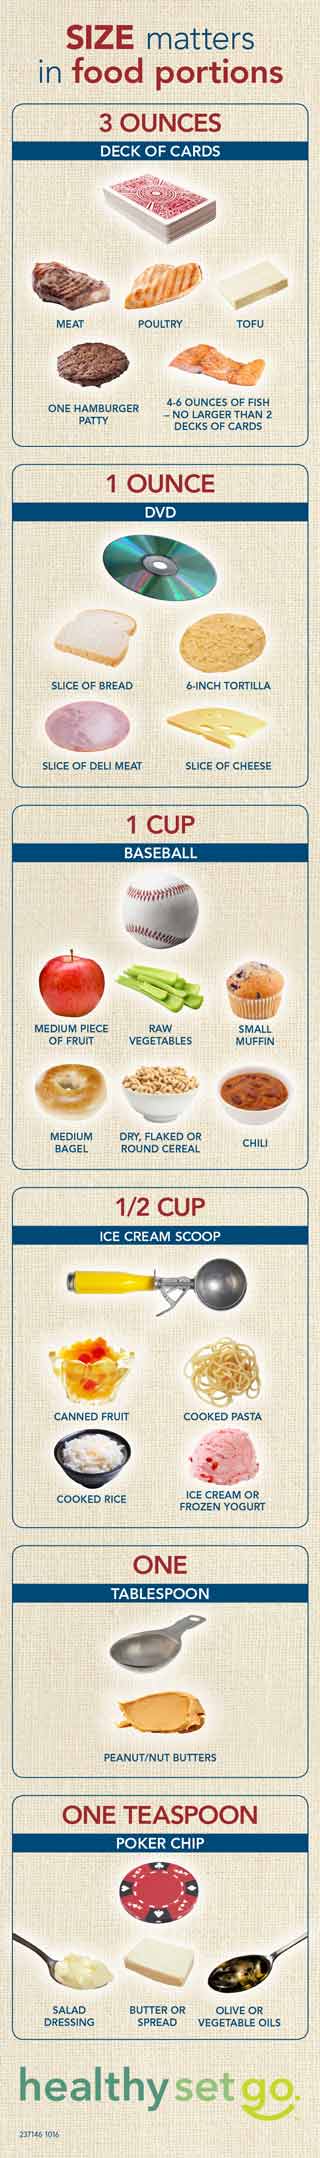 food size portion infographic small